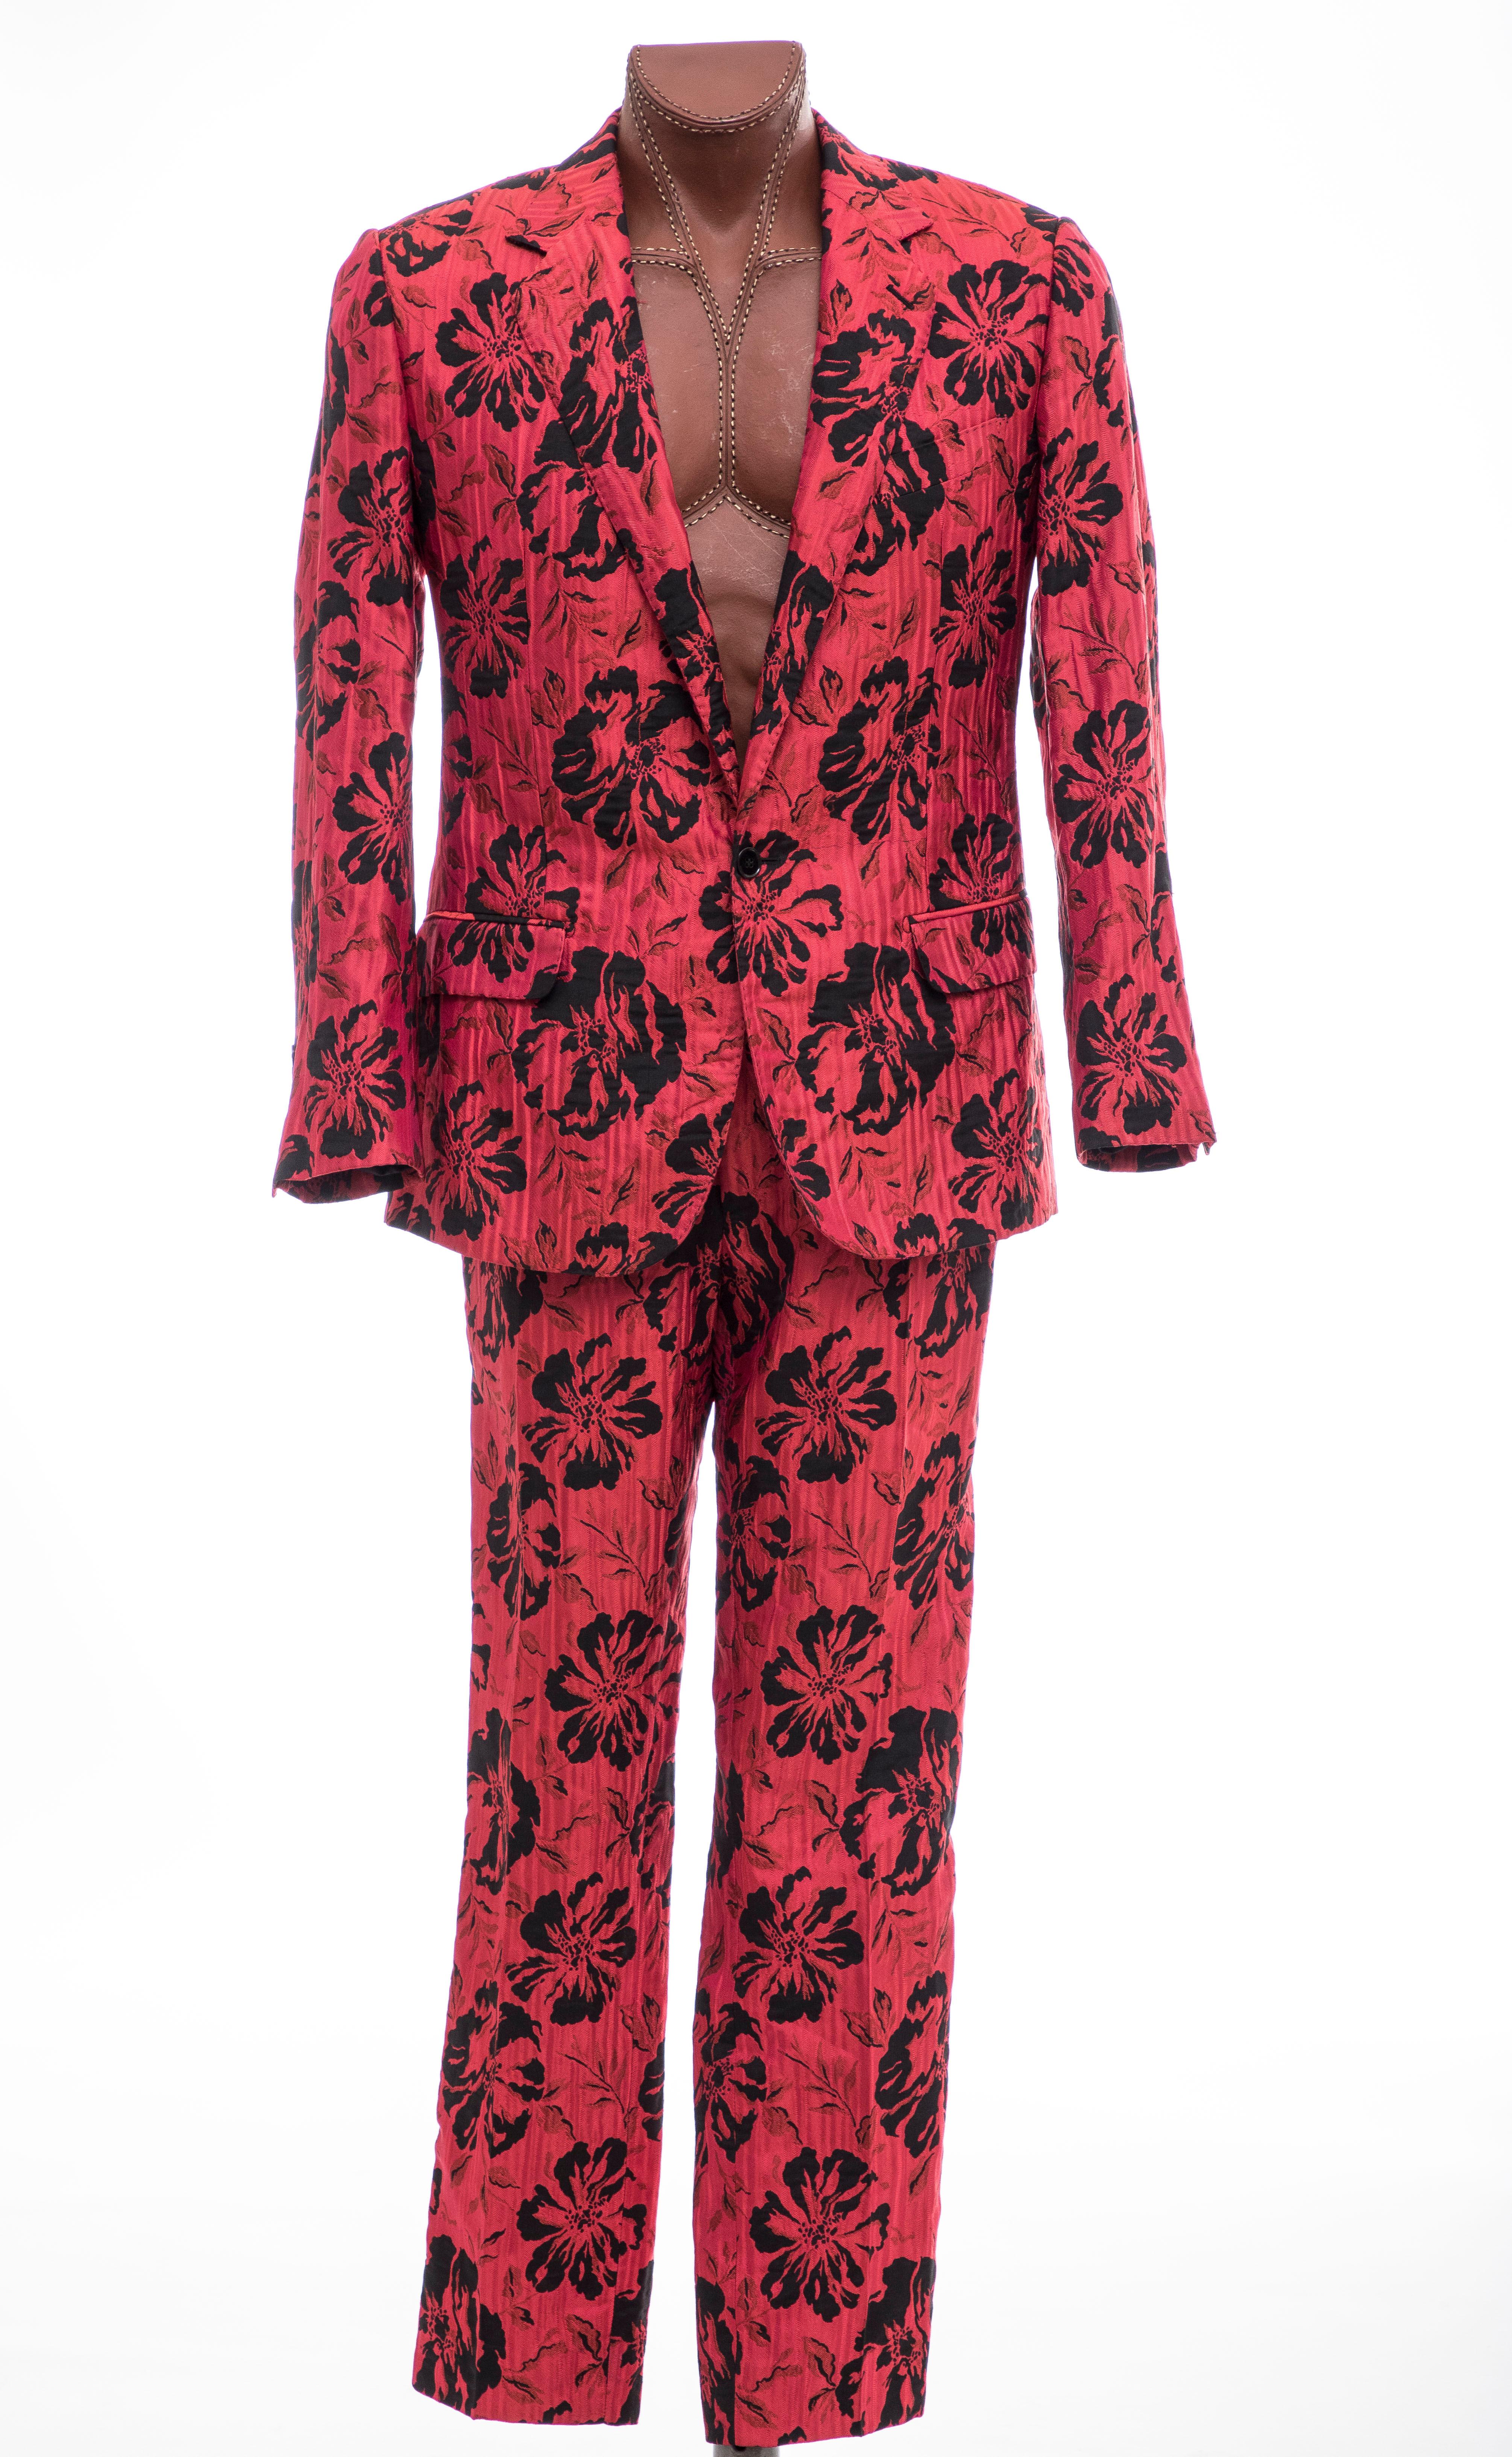  Dolce & Gabbana, Autumn - Winter 2011 red floral jacquard two-piece suit. Jacket features notched lapels, three front pockets, three interior welt pockets, back hem vent and front button closure. Slim-leg pants features two front pockets, two side